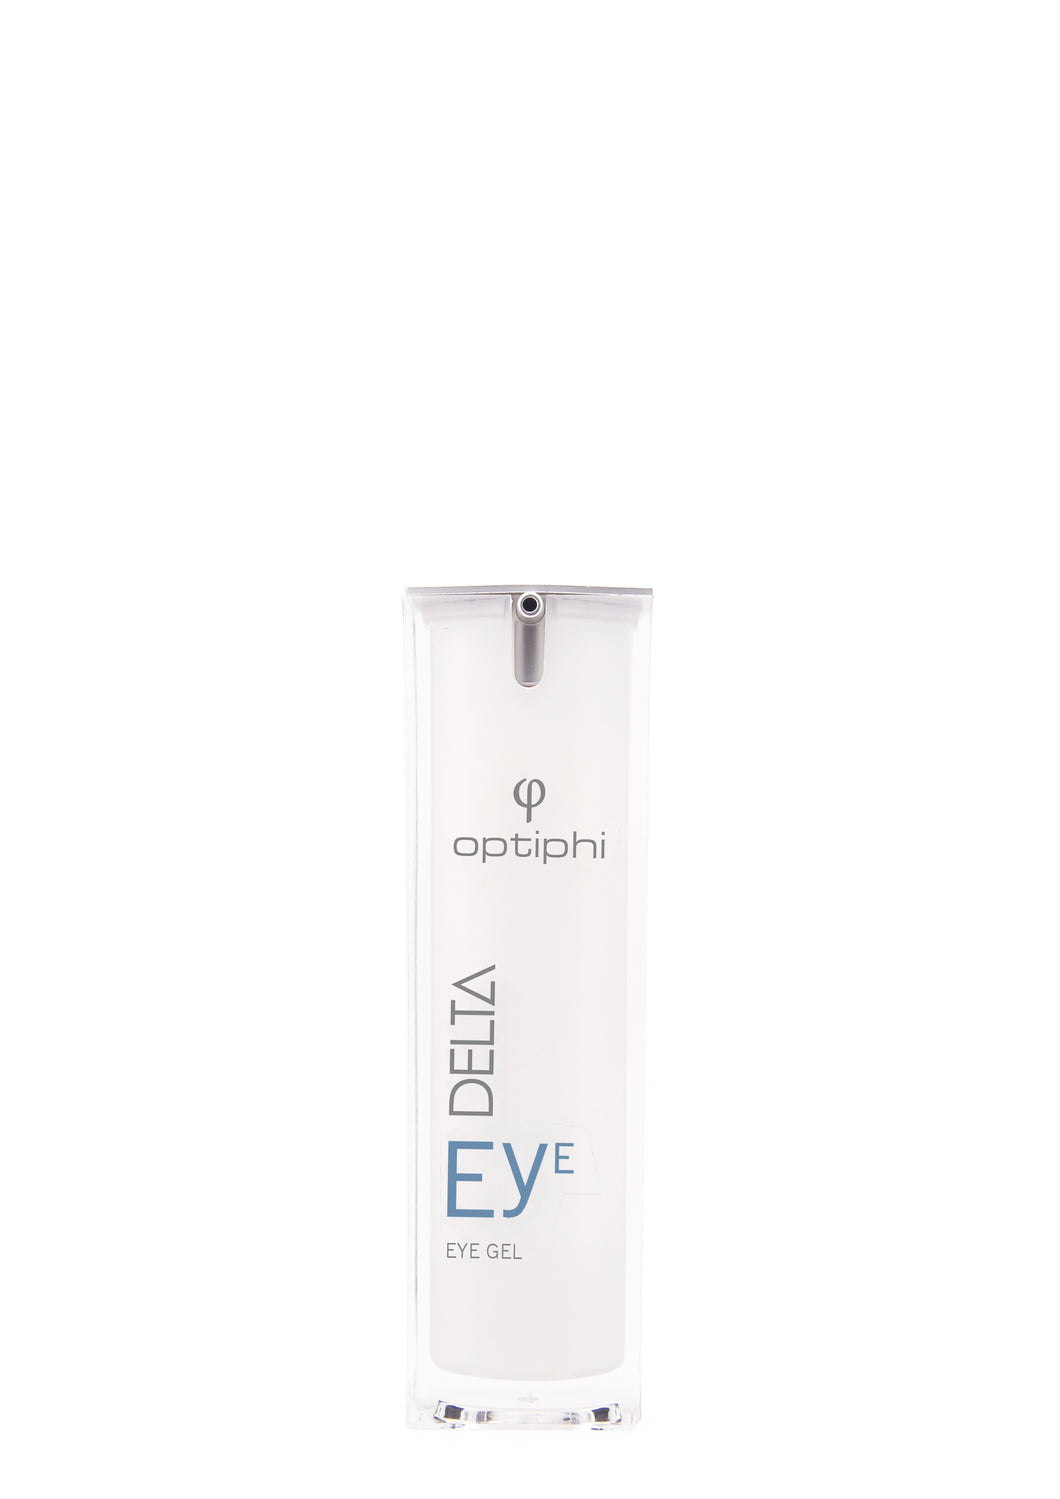 A powerful gel that nourishes and rejuvenates the eye-area. This gel targets hydration levels, collagen formation and organization, dark circles and fluid retention, as well as epidermal regeneration and thickness.